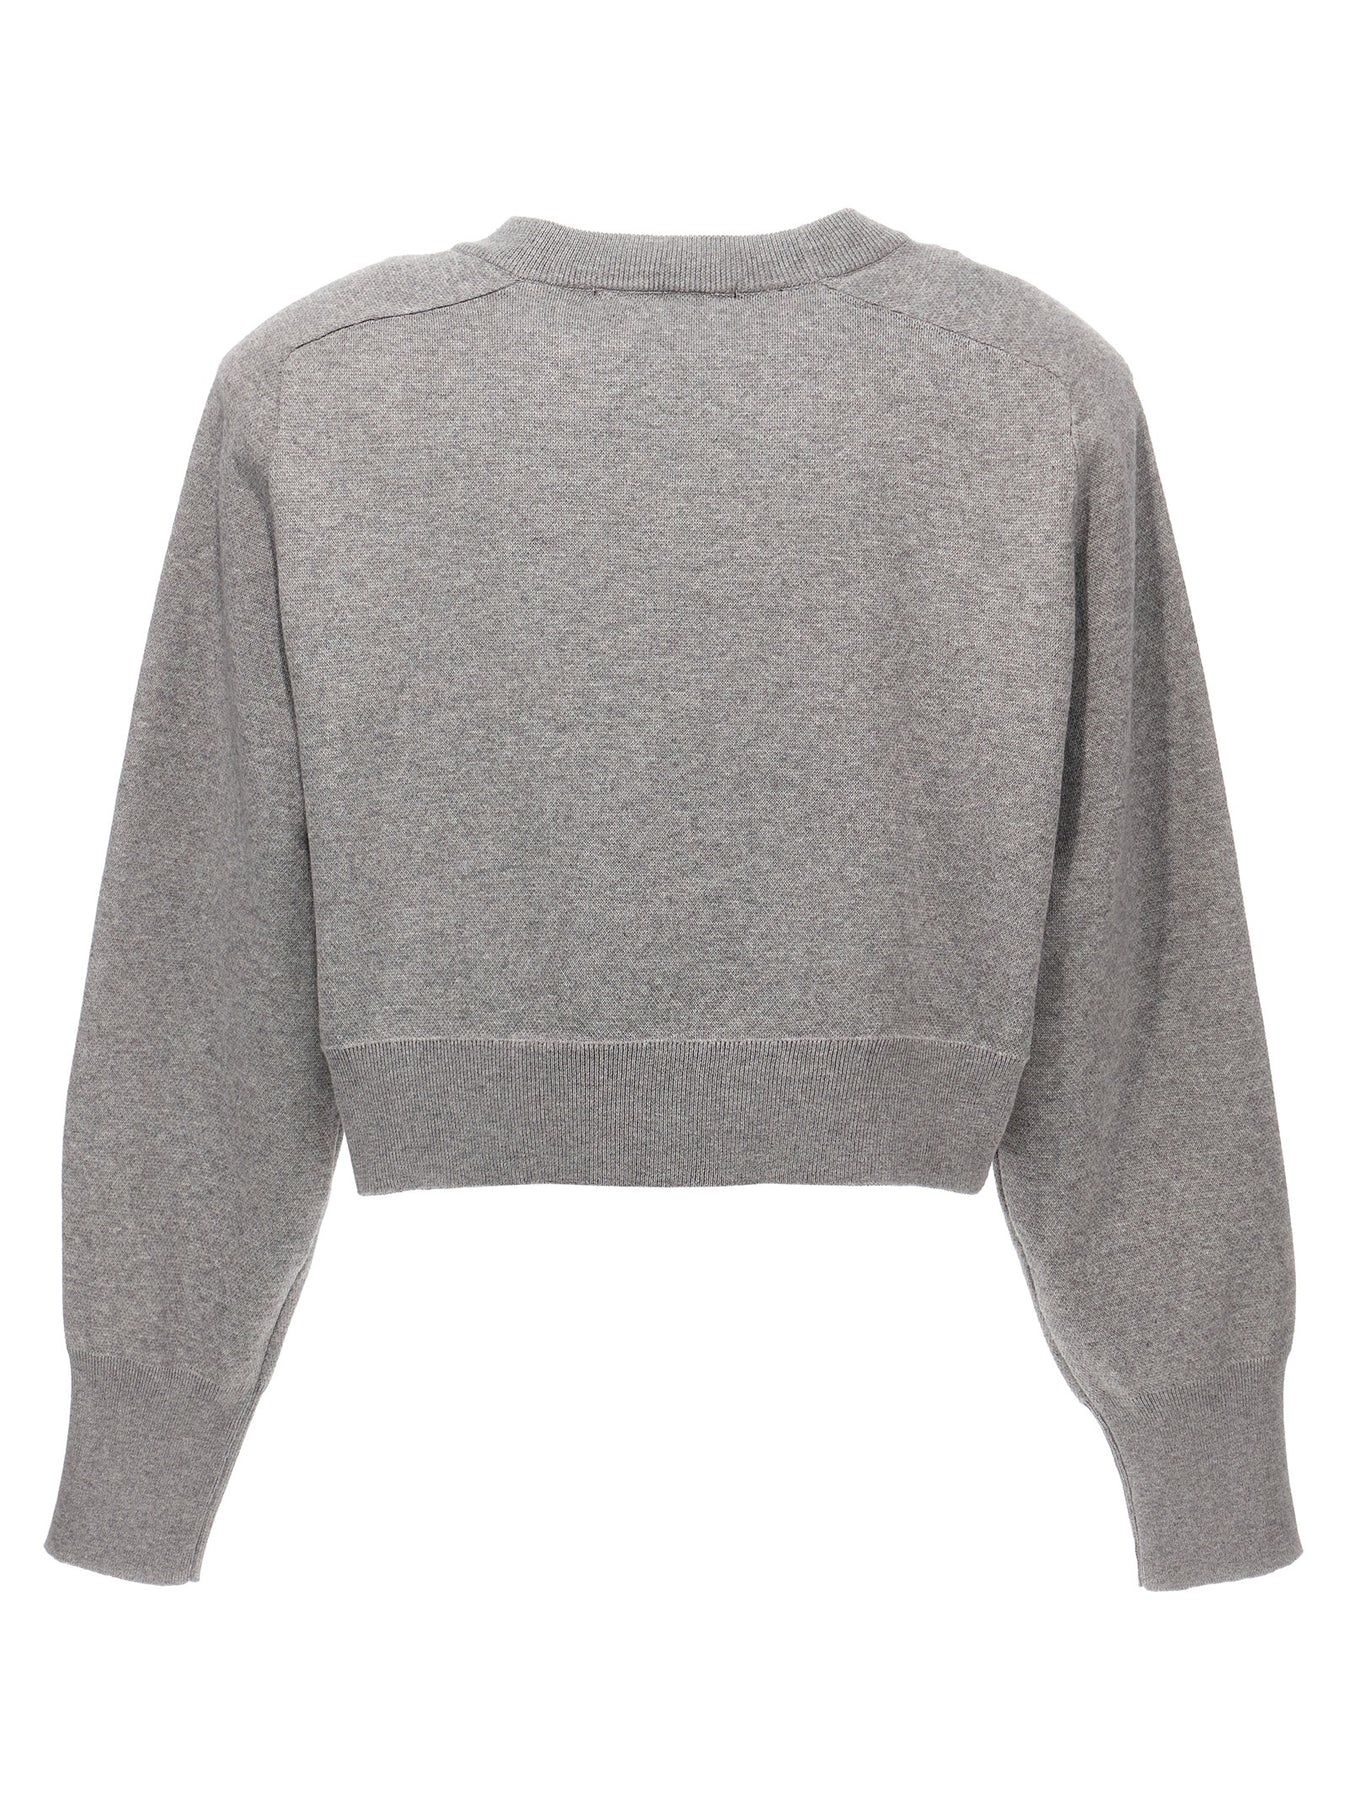 Shop Rotate Birger Christensen Firm Knit Cropped Sweater, Cardigans In Gray